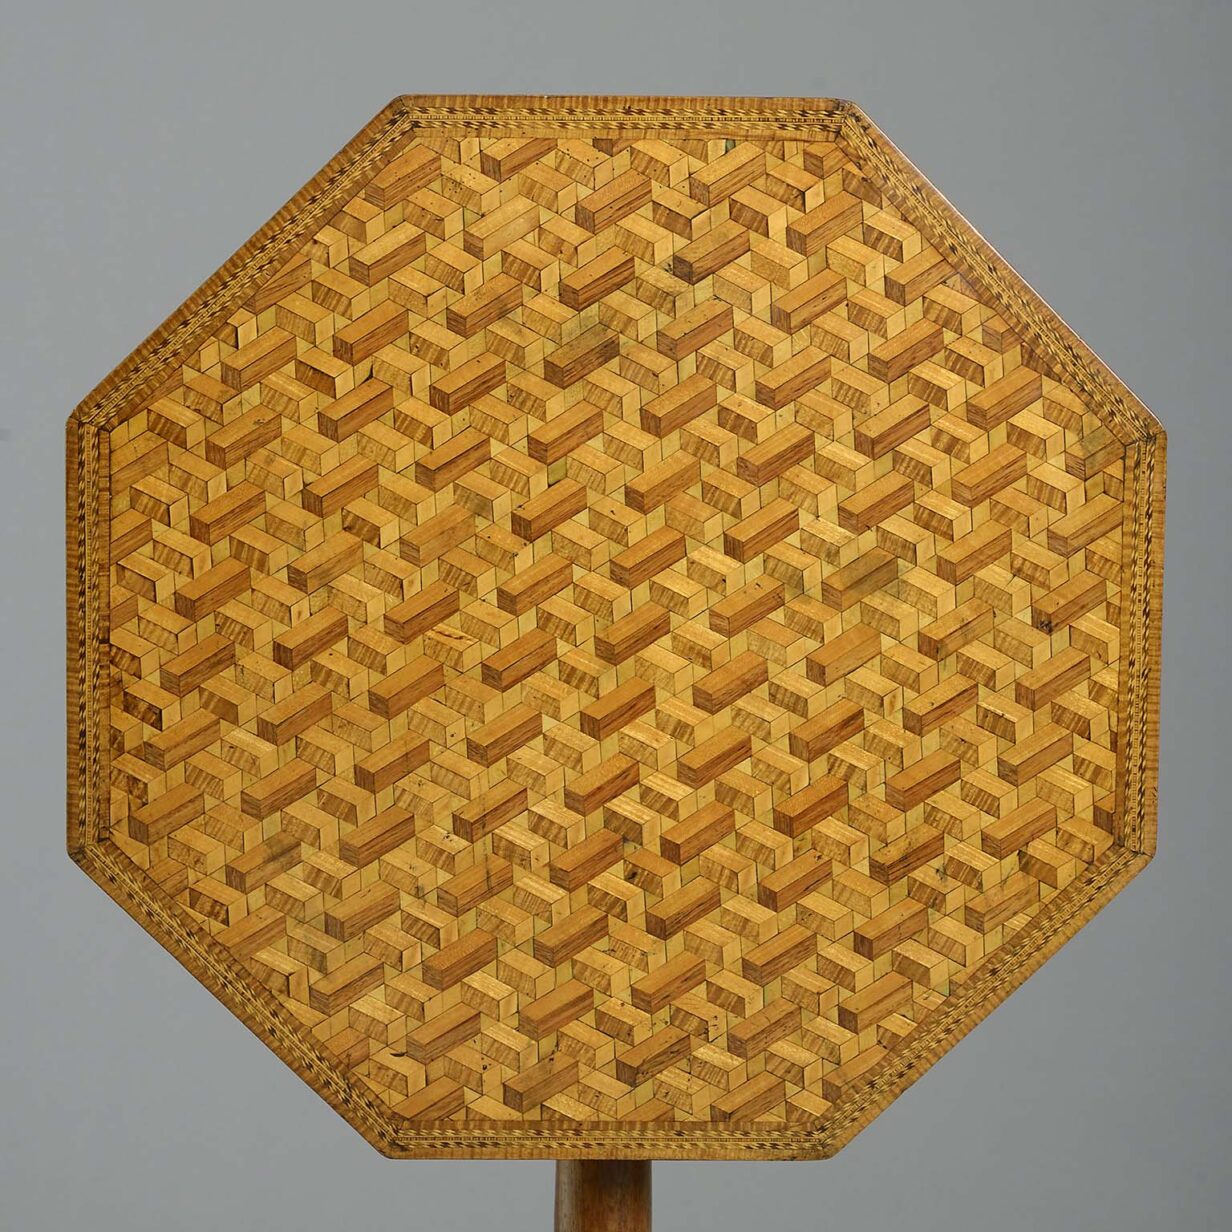 Late 18th century george iii period parquetry tripod table